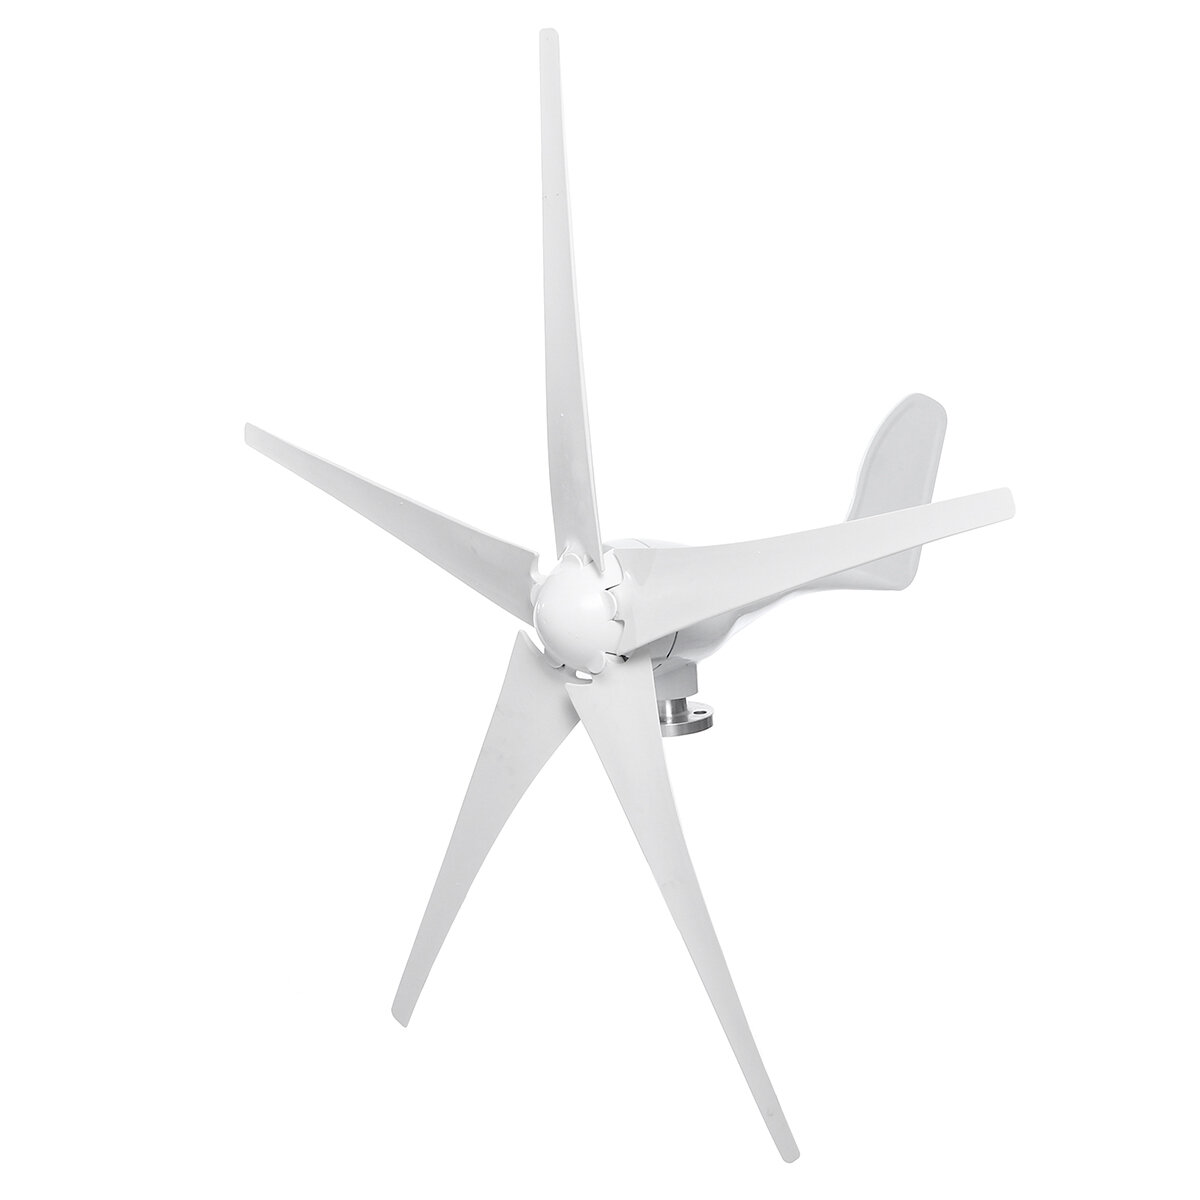 

DC 12V/24V 1000W Peak Wind Turbine Power Generator 3/5 Blades with Charge Controller